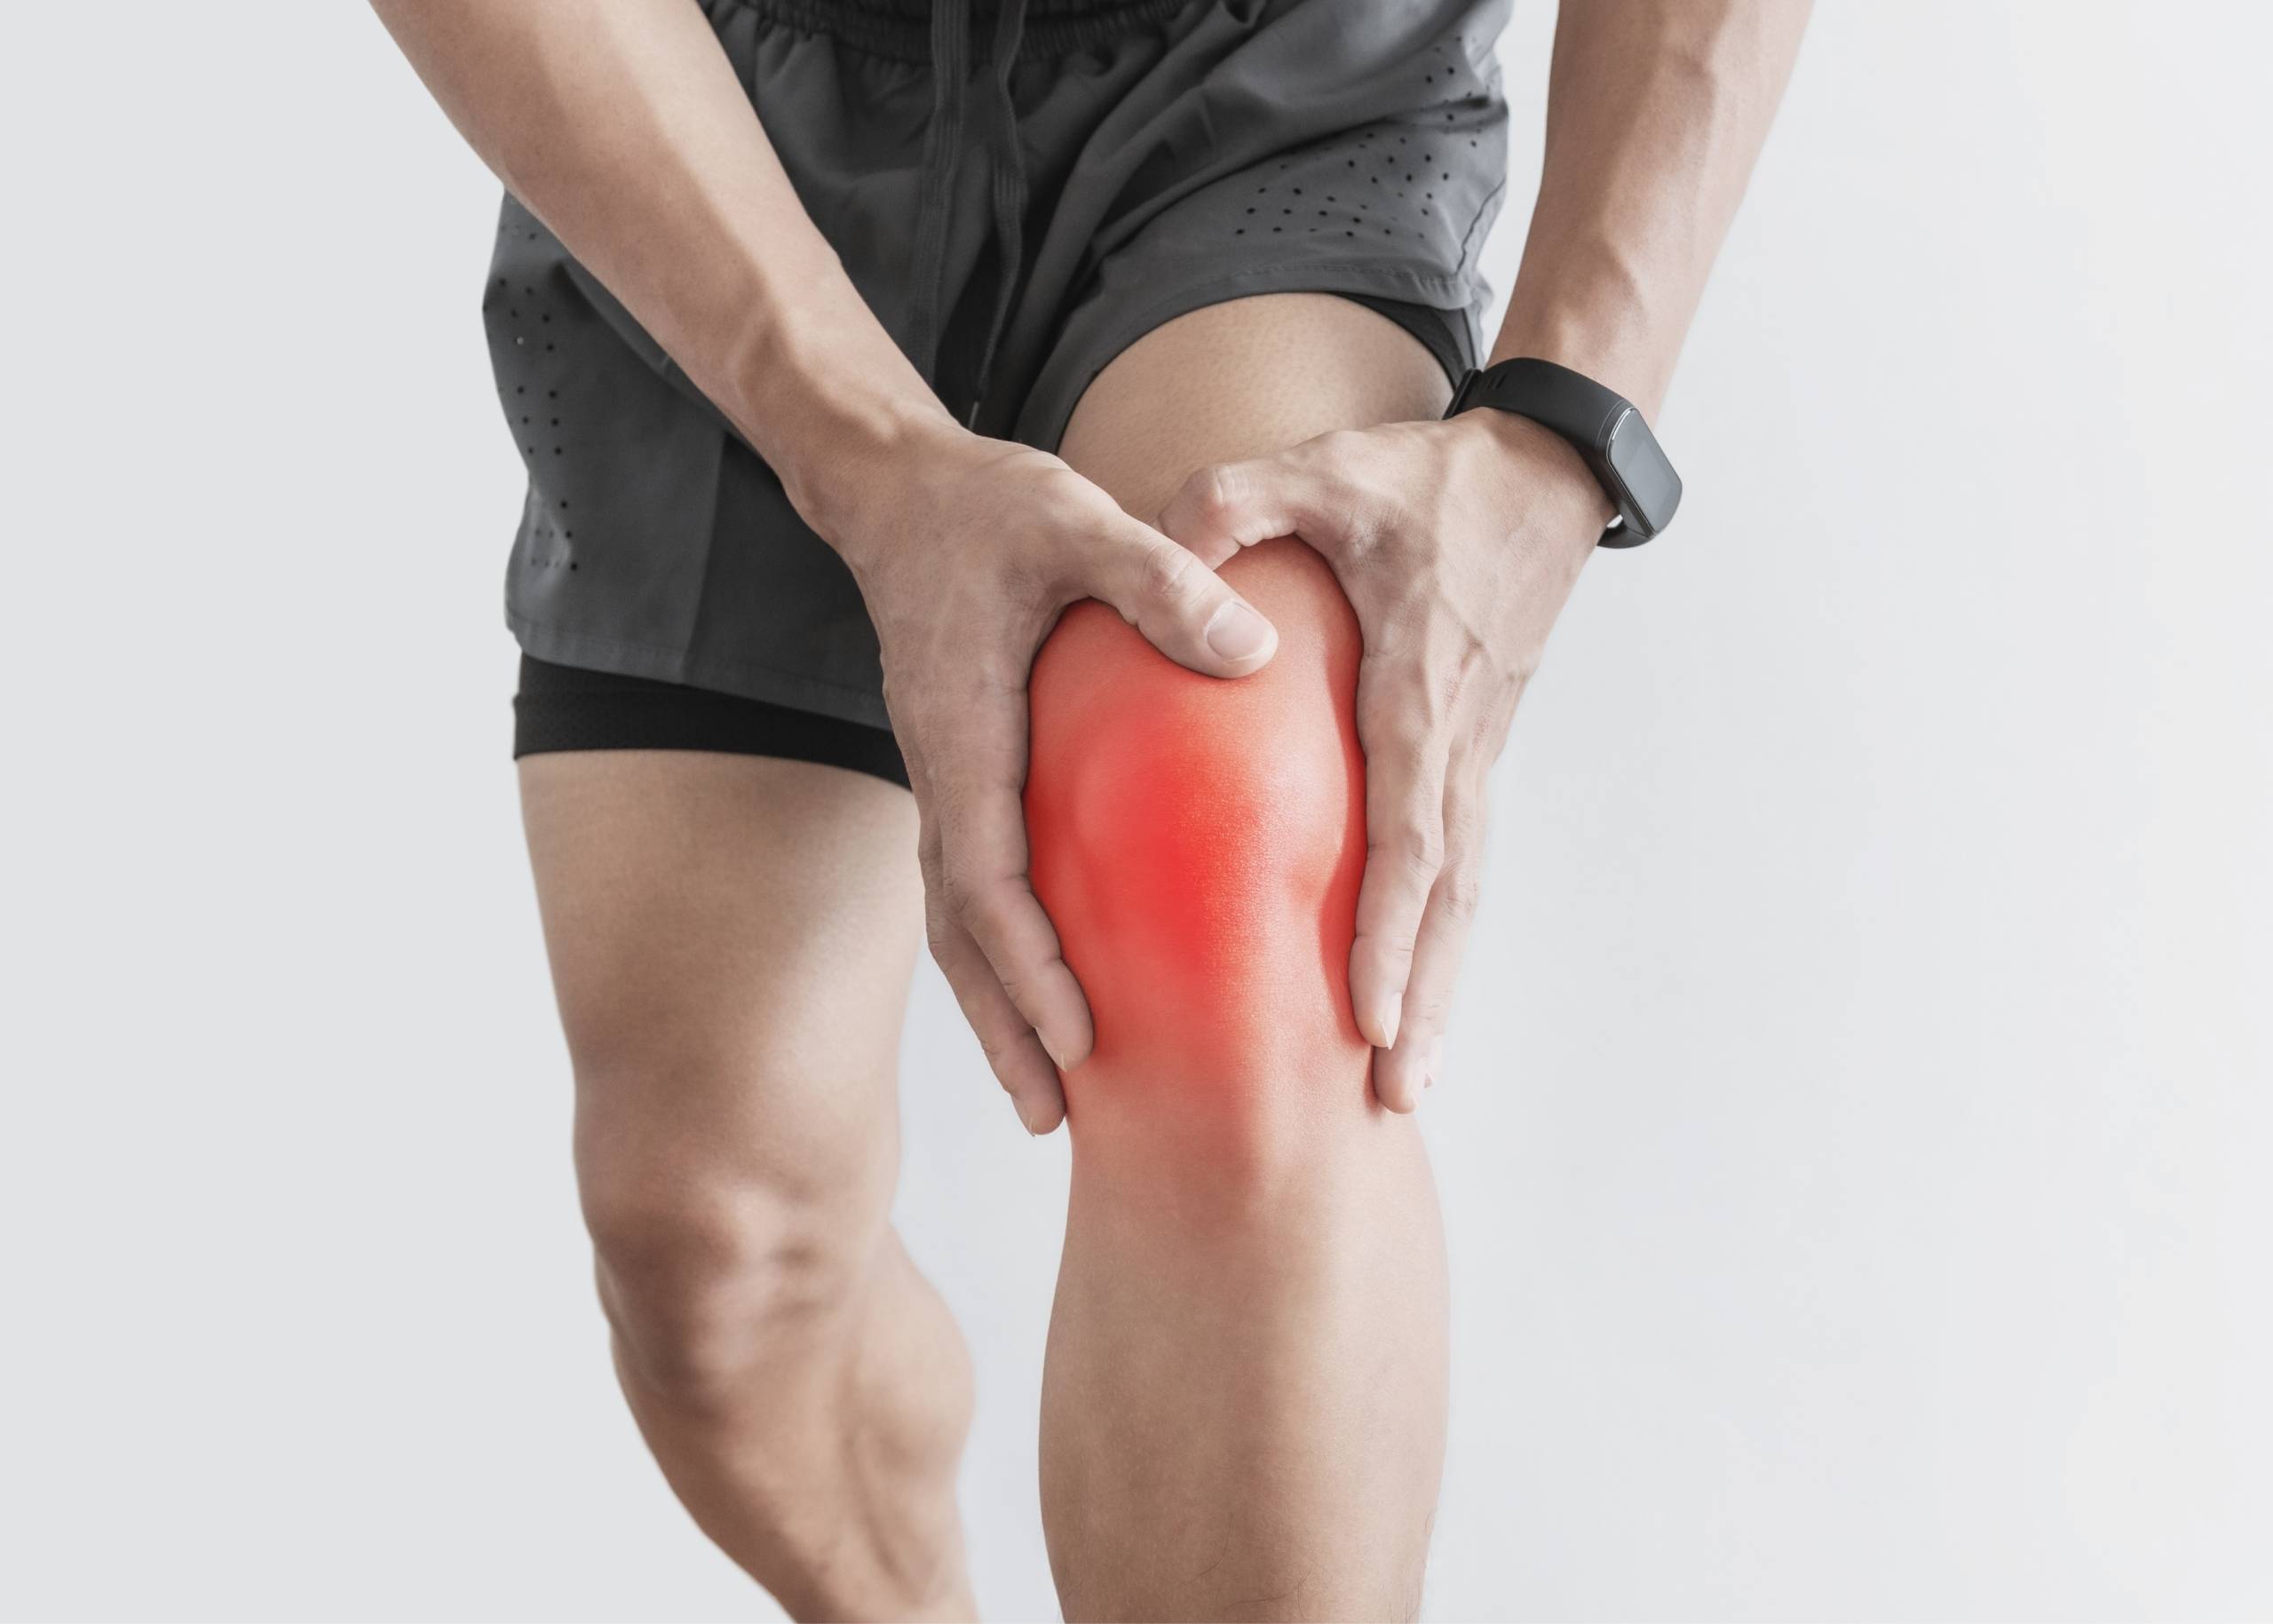 All You Need to Know About Knee Pain